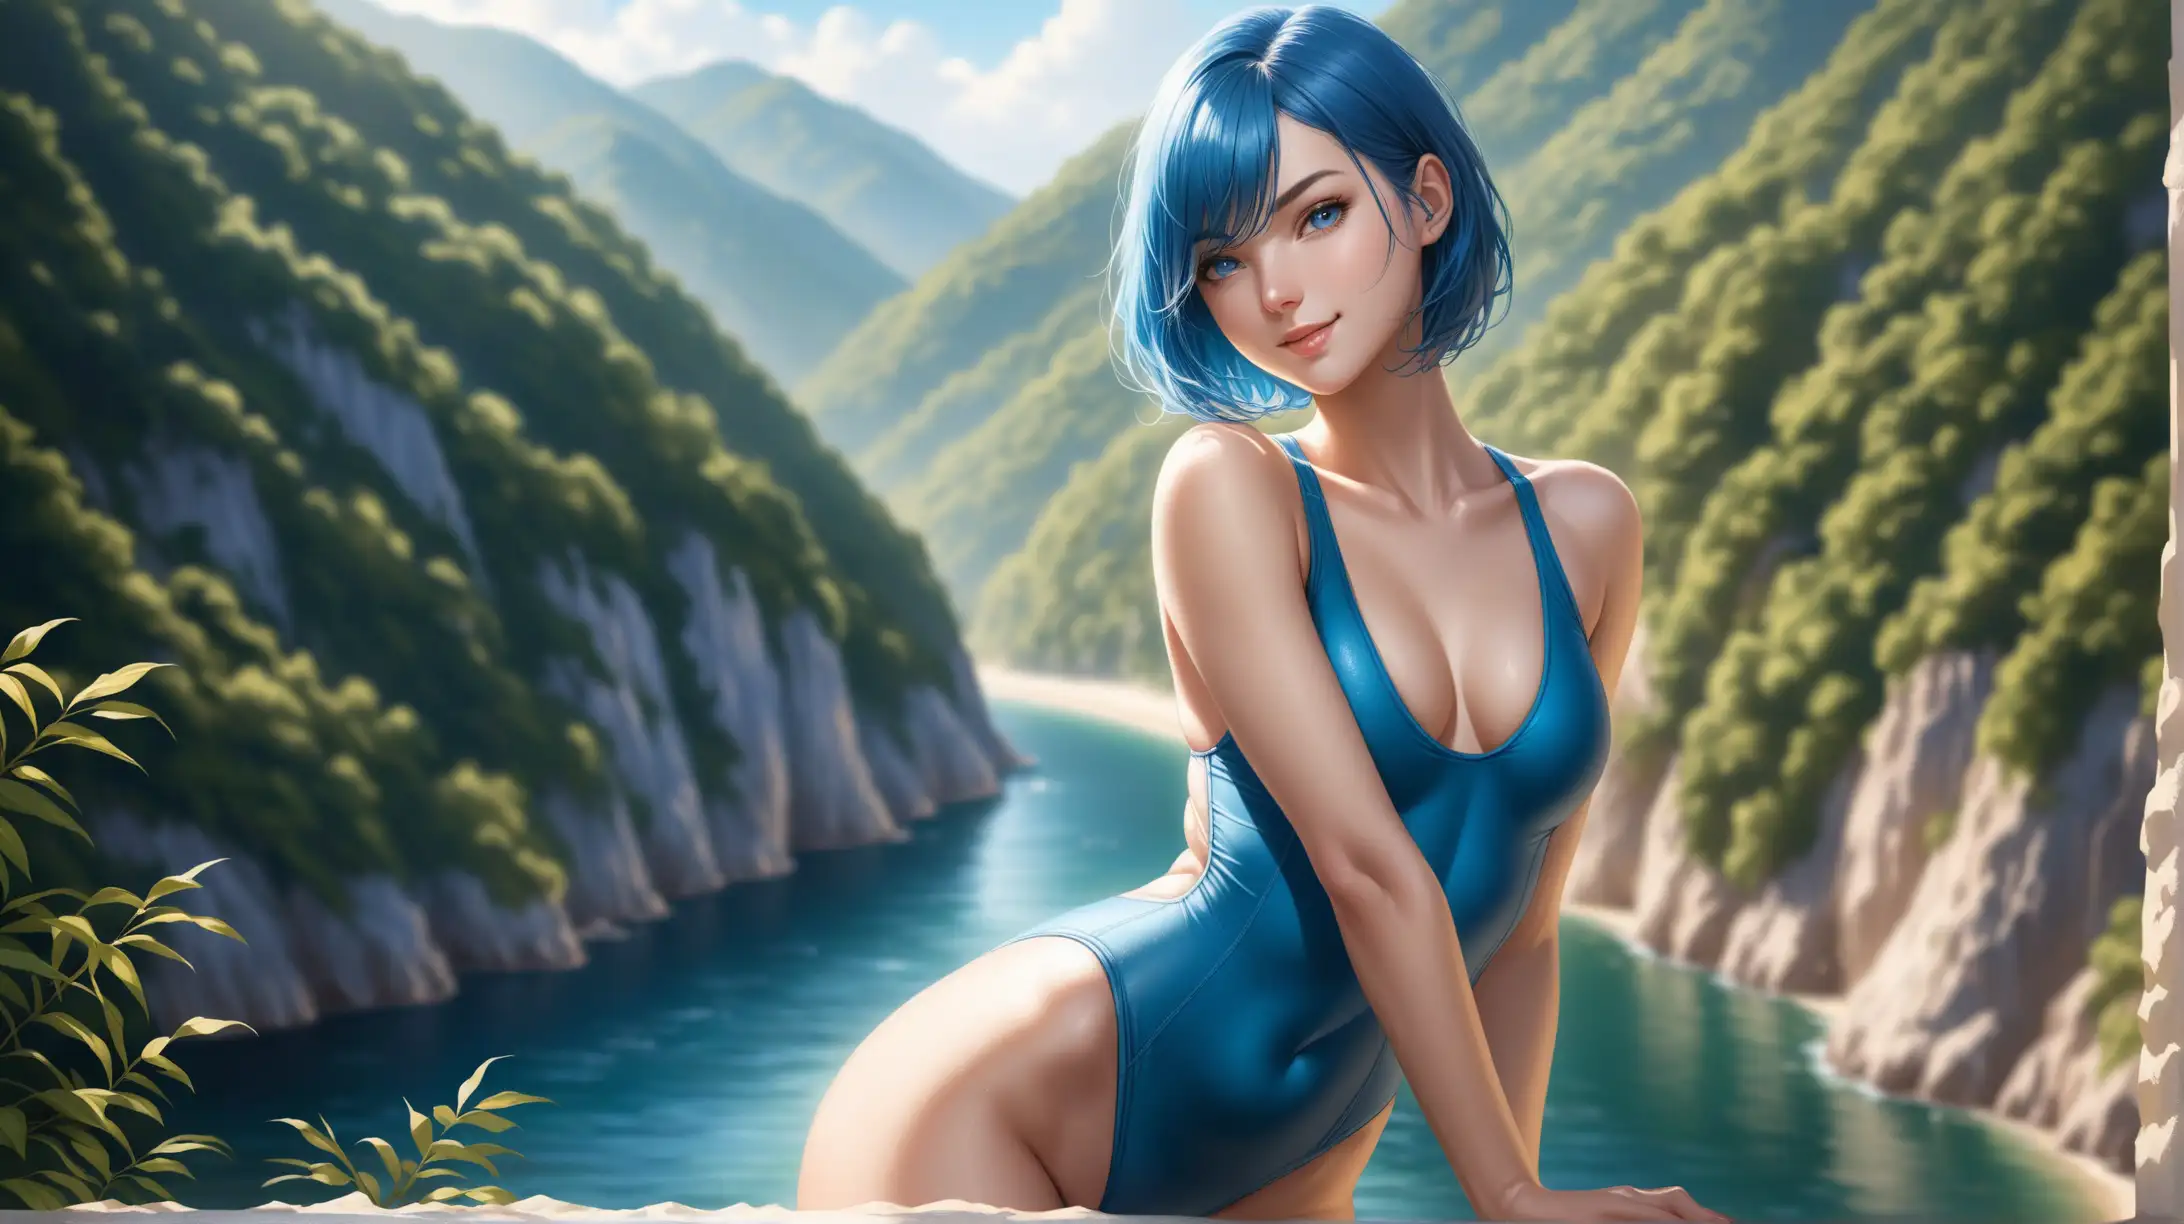 Seductive Woman with Short Blue Hair in OnePiece Swimsuit Smiling Outdoors